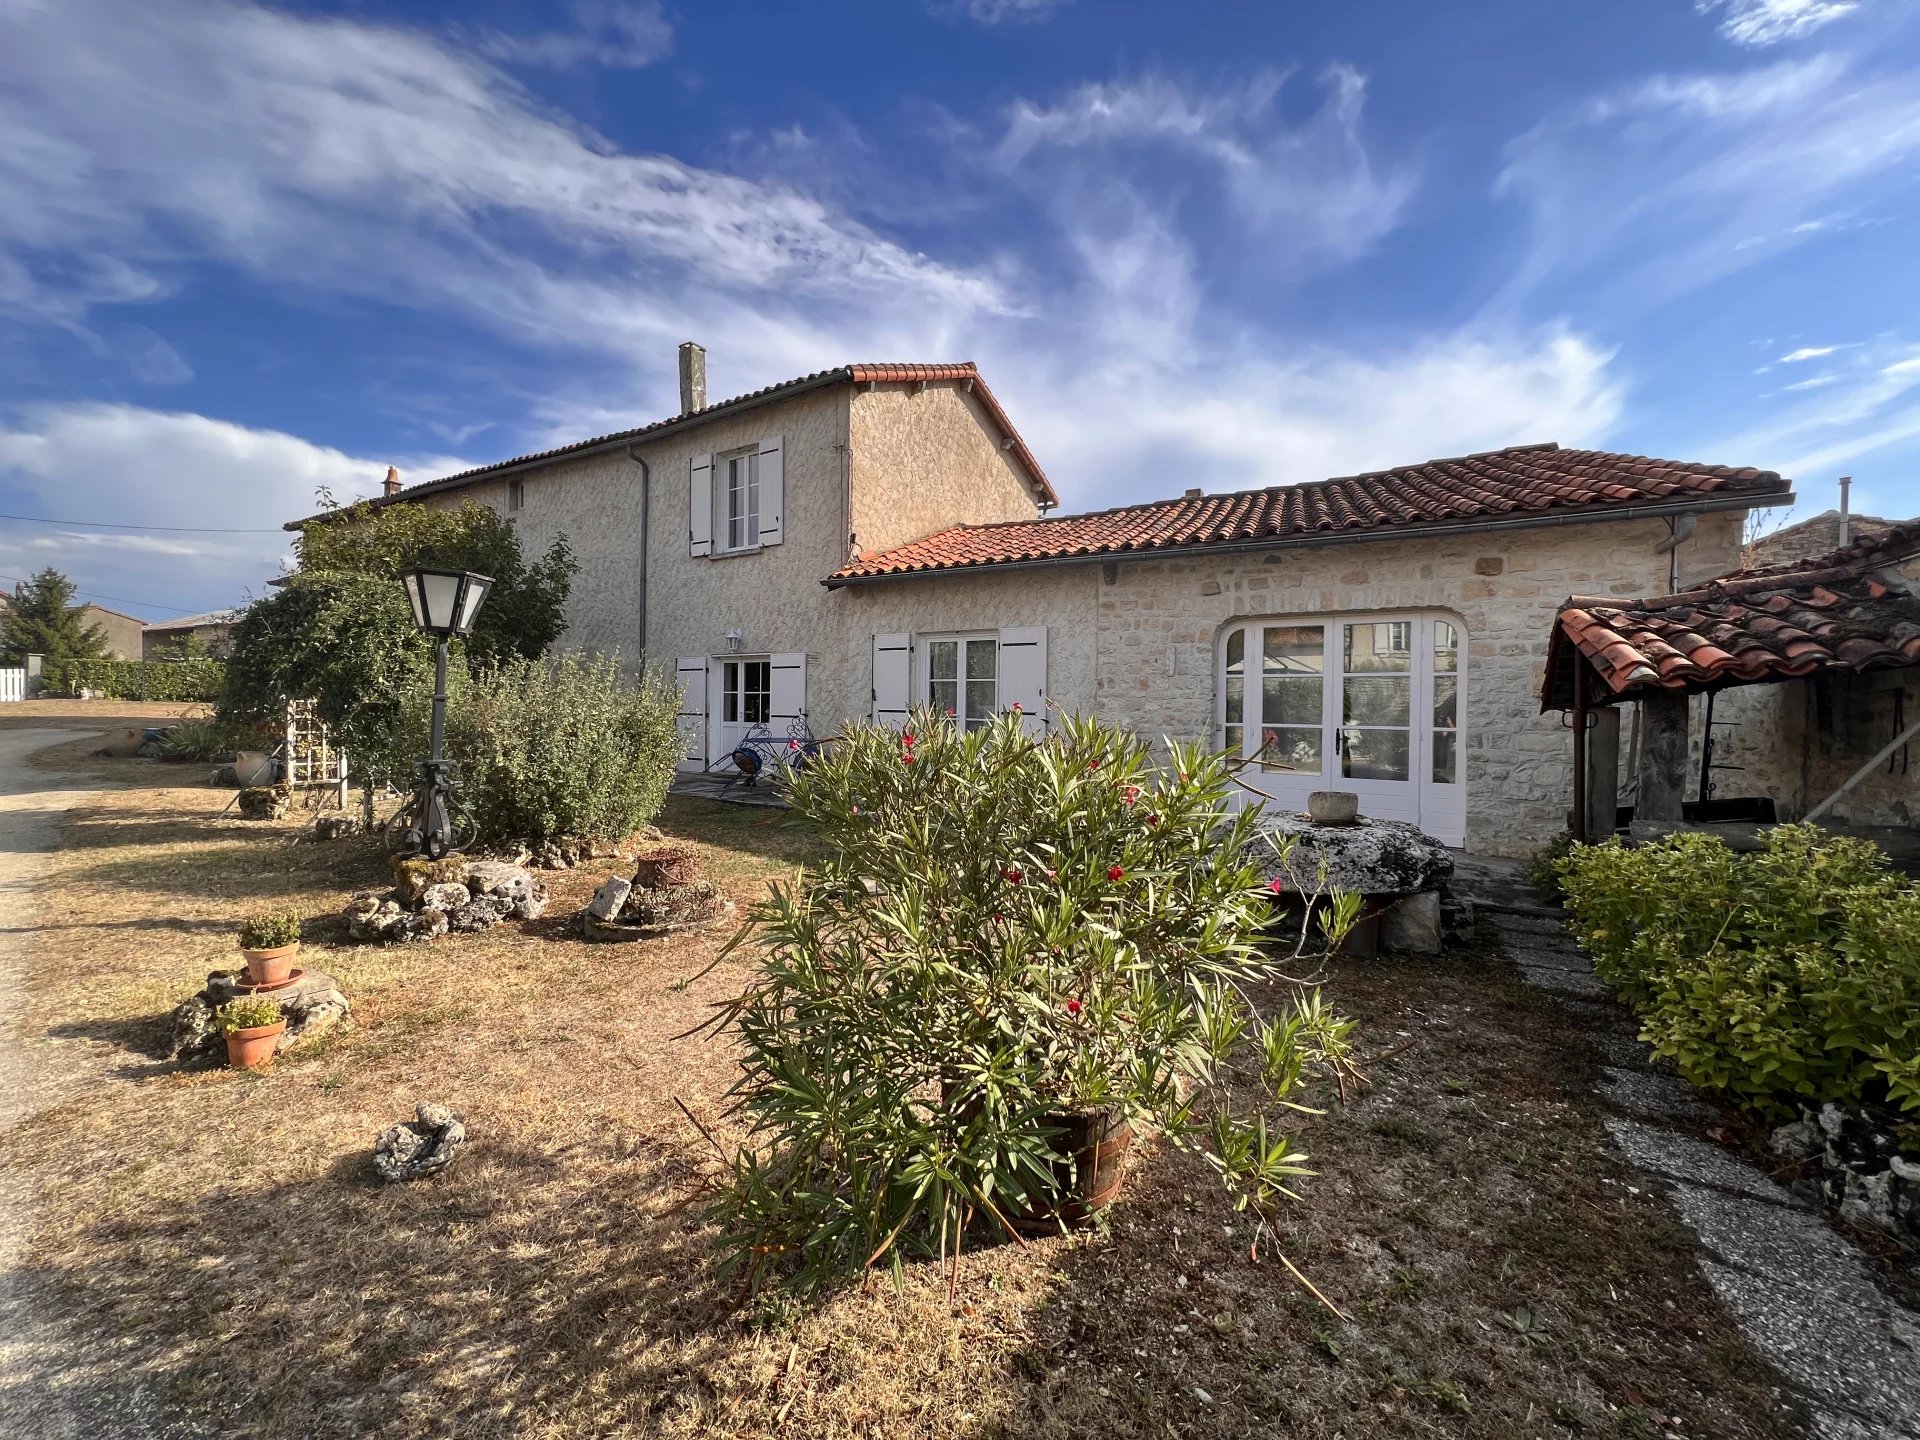 3 bedroom house with barn, shed, workshop and spacious grounds in Salles de Villefagnan